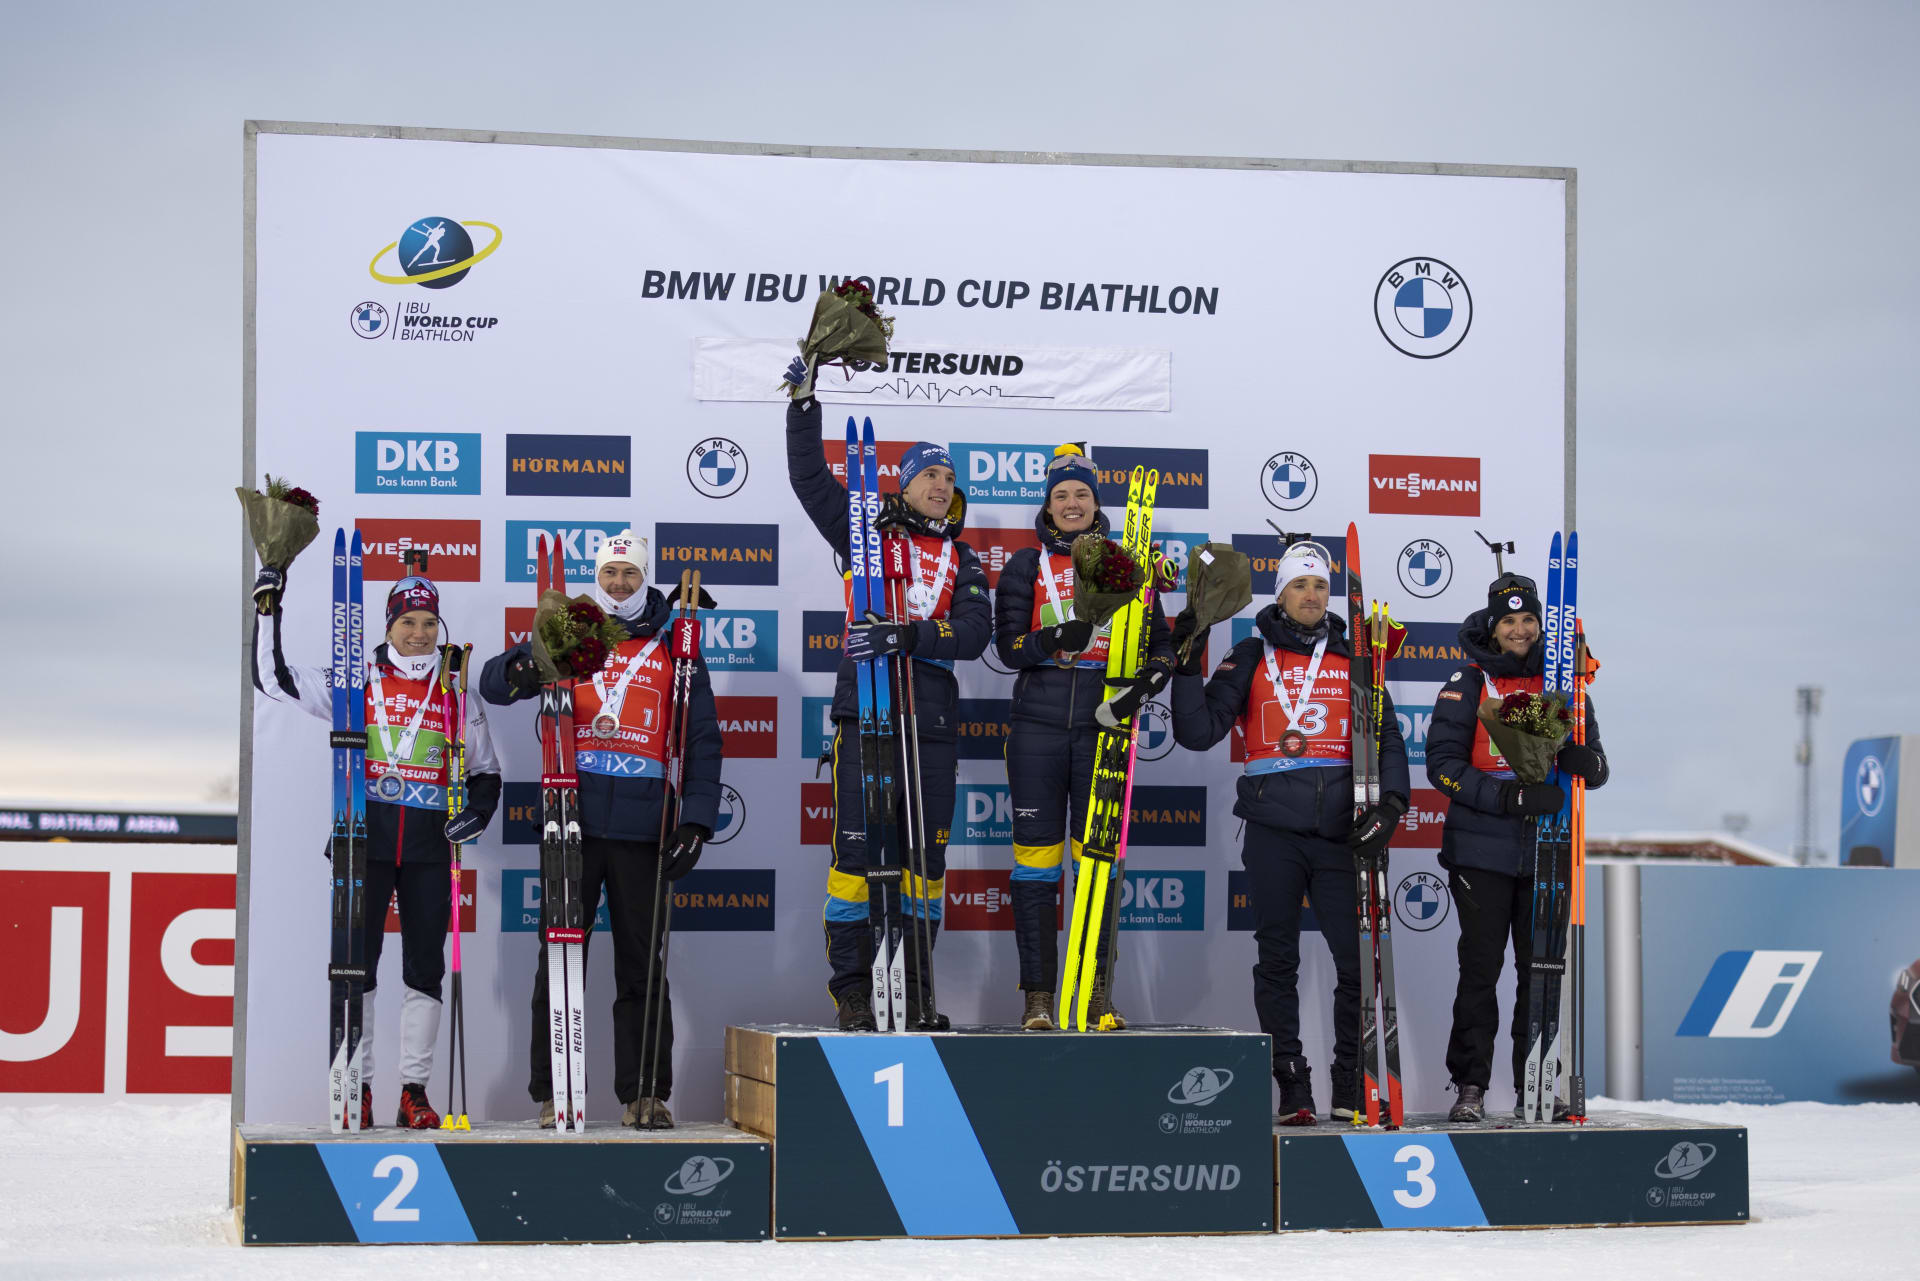 Sweden Opens Season with Single Mixed Relay Win